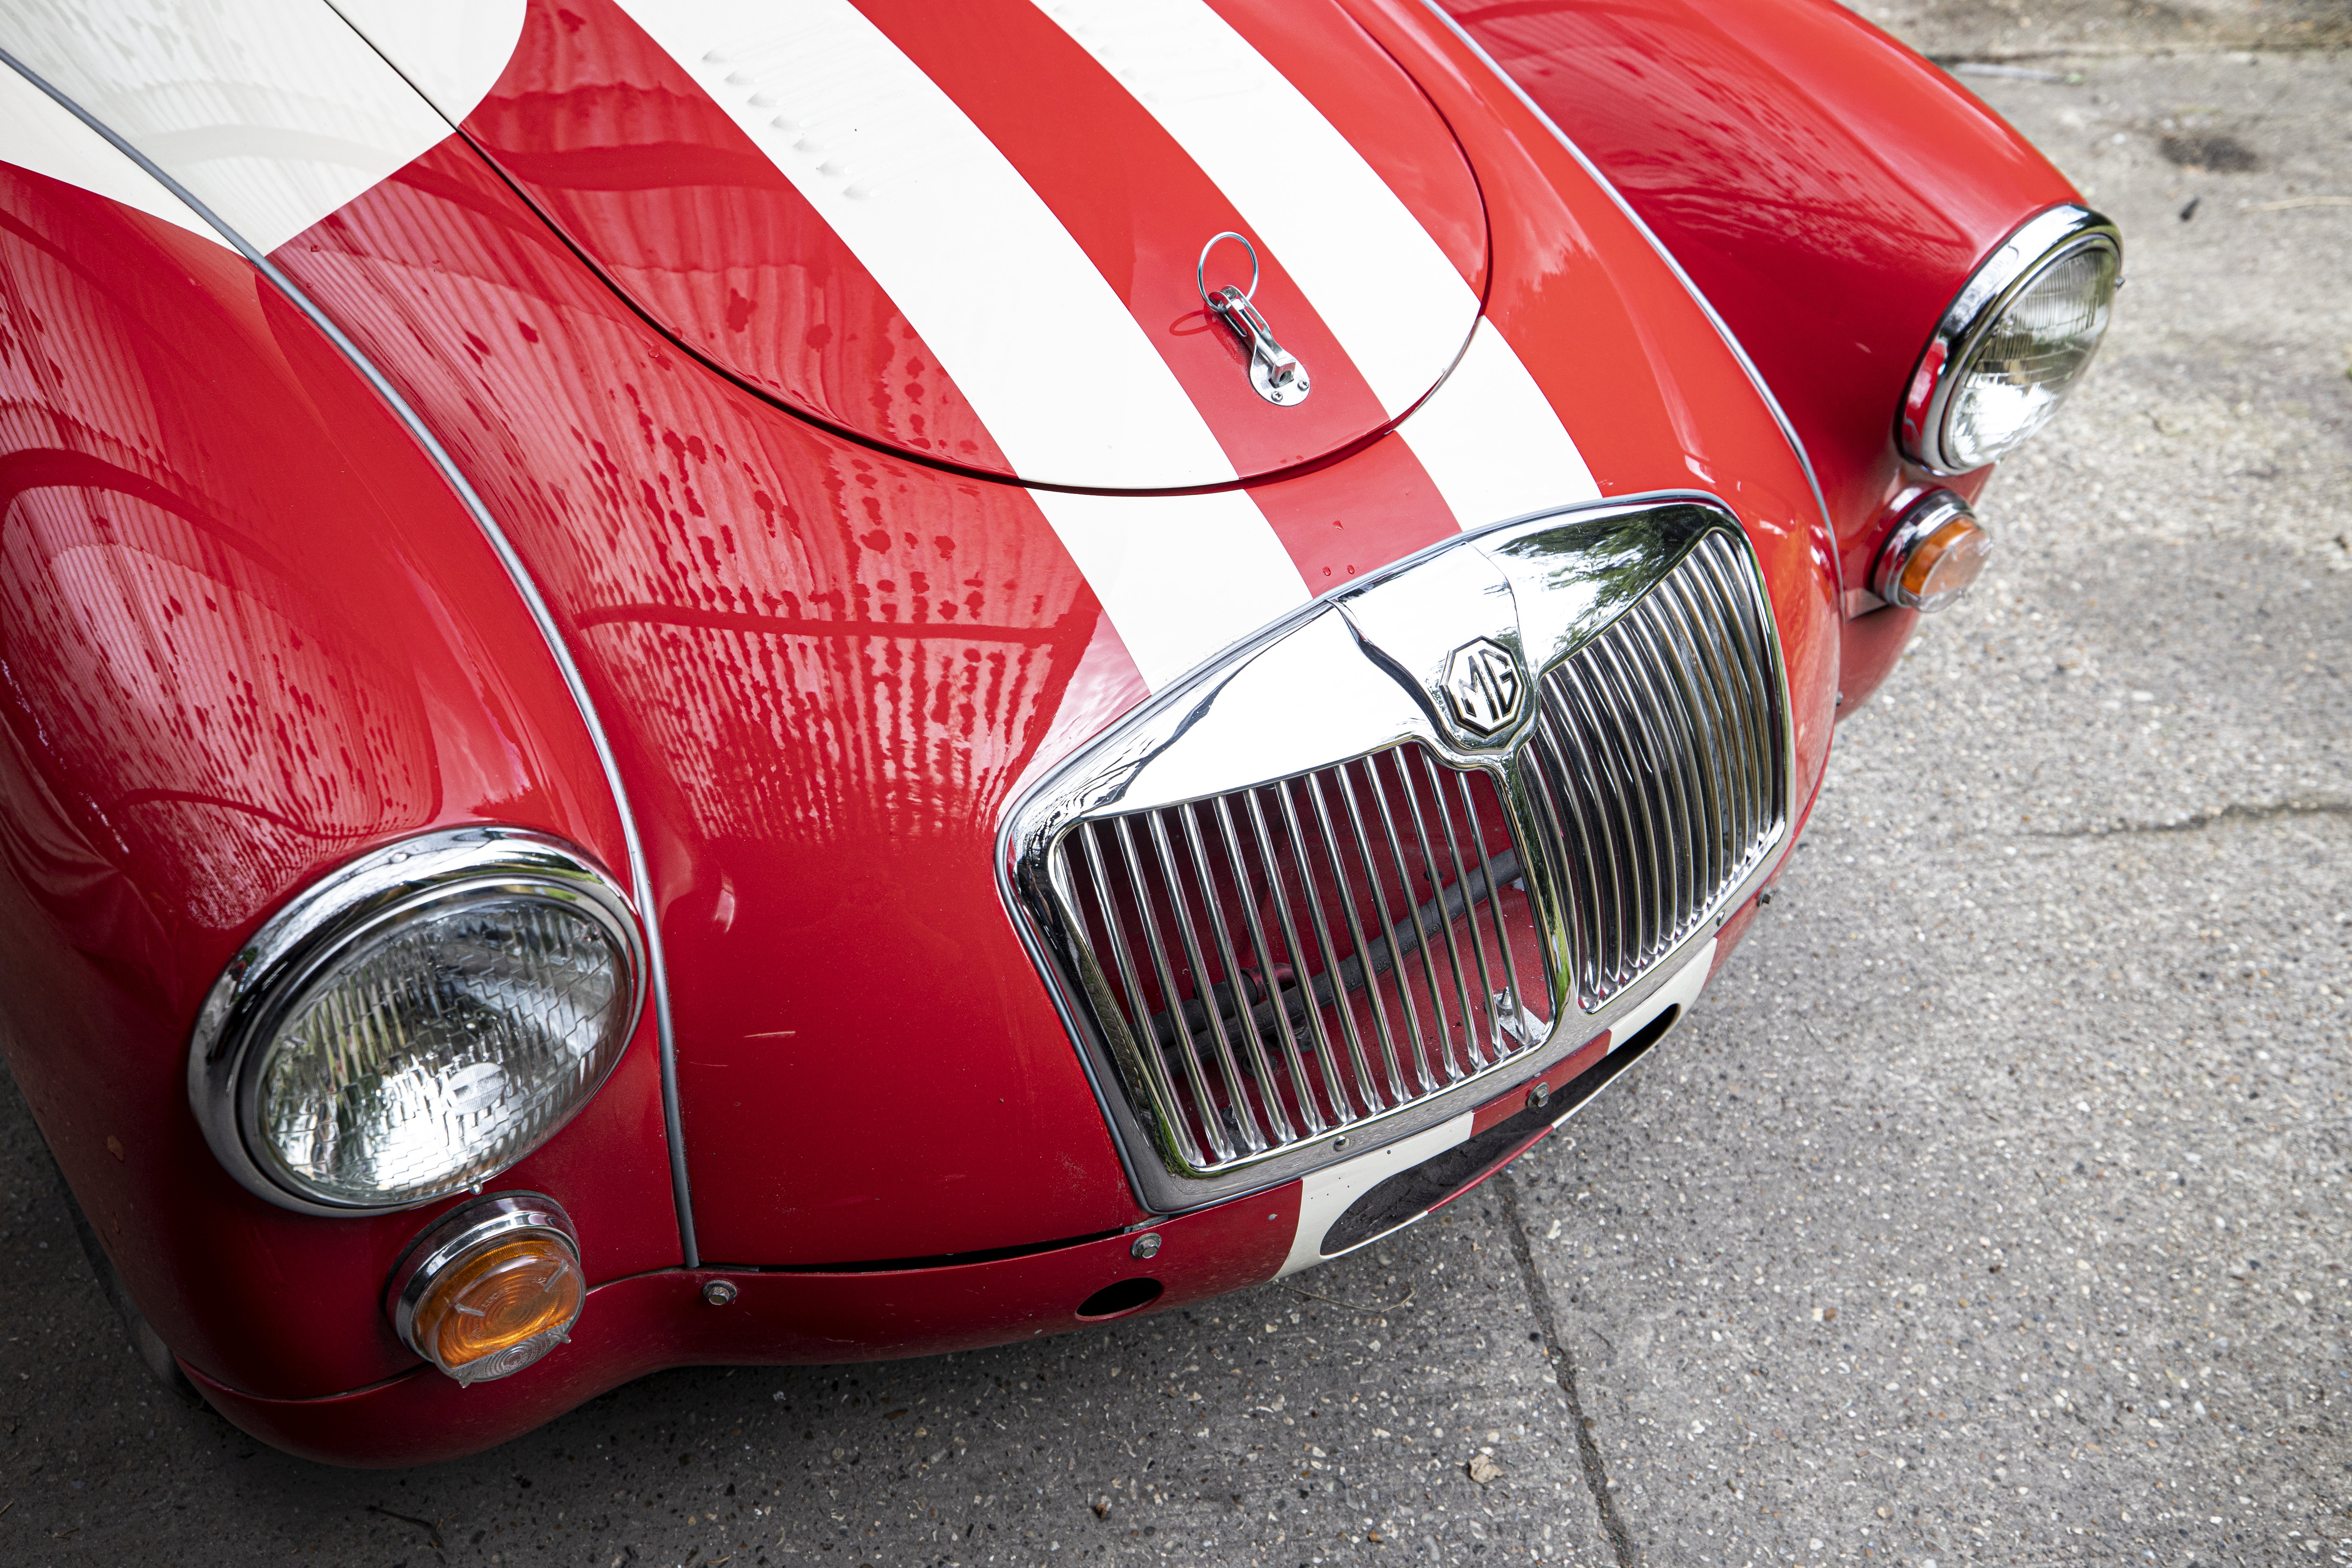 1960 MGA FIA Competition Roadster Chassis no. GHN/91842 - Image 10 of 19